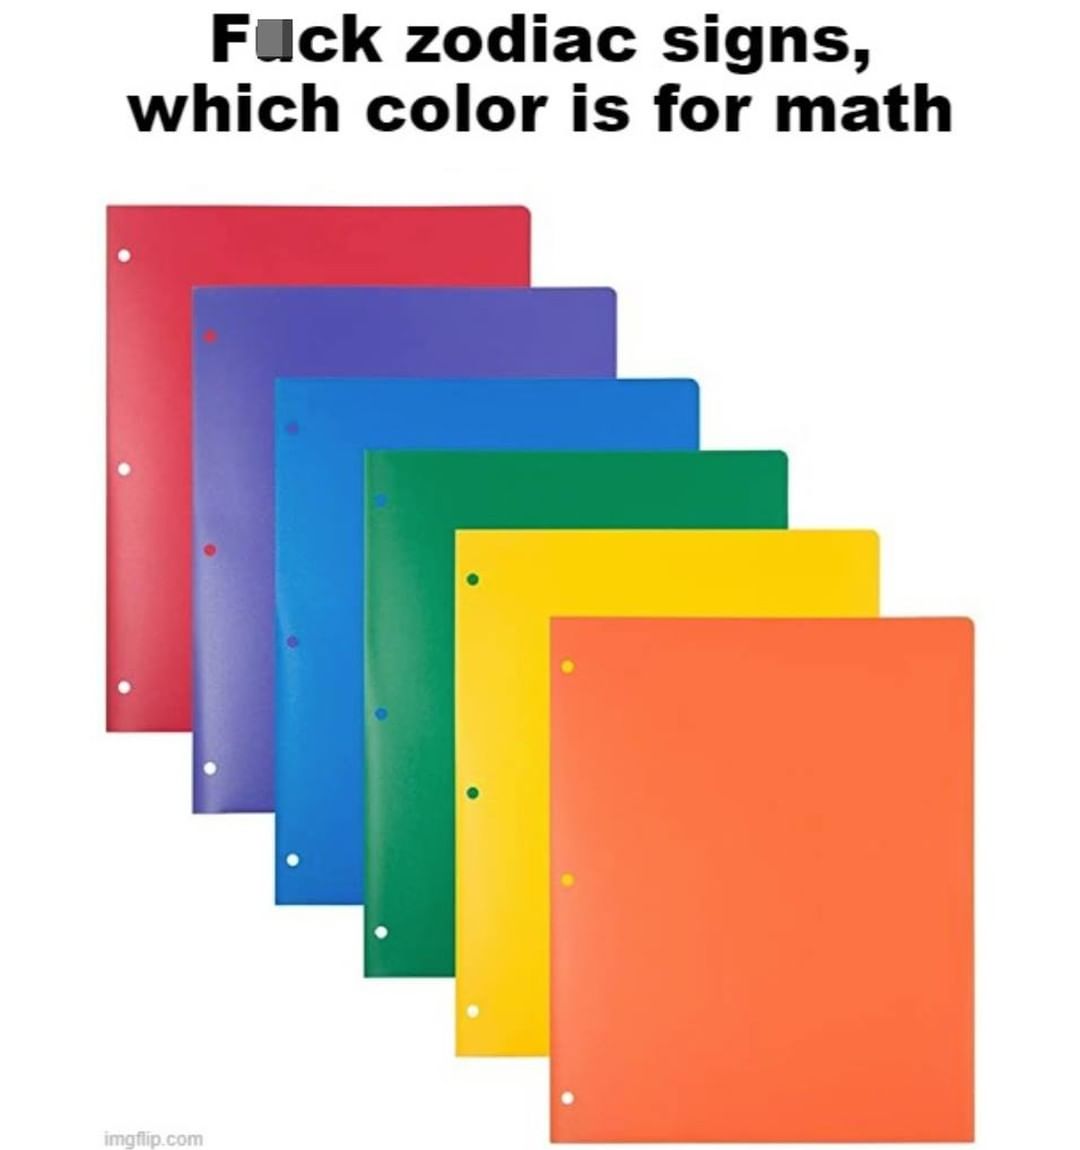 Fuck zodiac signs, which color is for math.